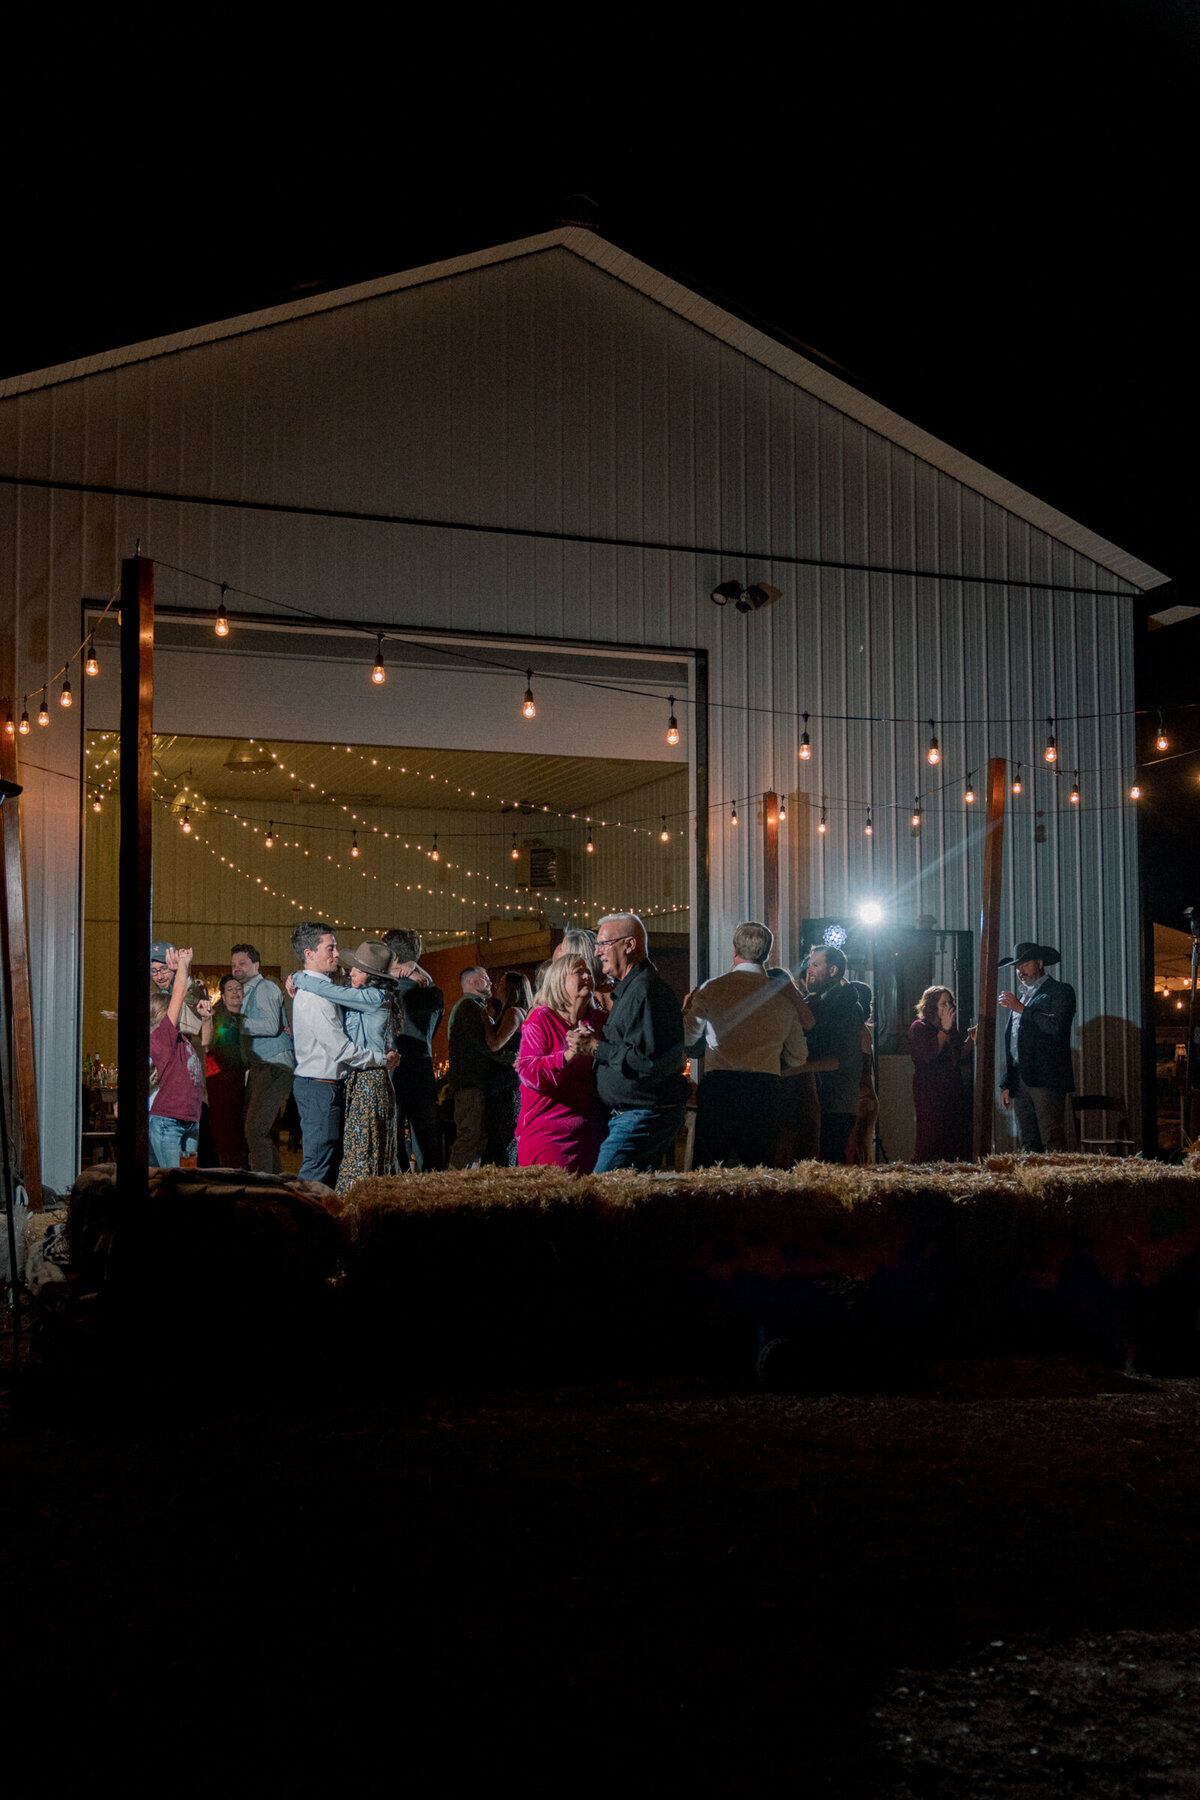 Steamboat_Springs_Ranch_wedding_Mary_Ann_craddock_photography_0077